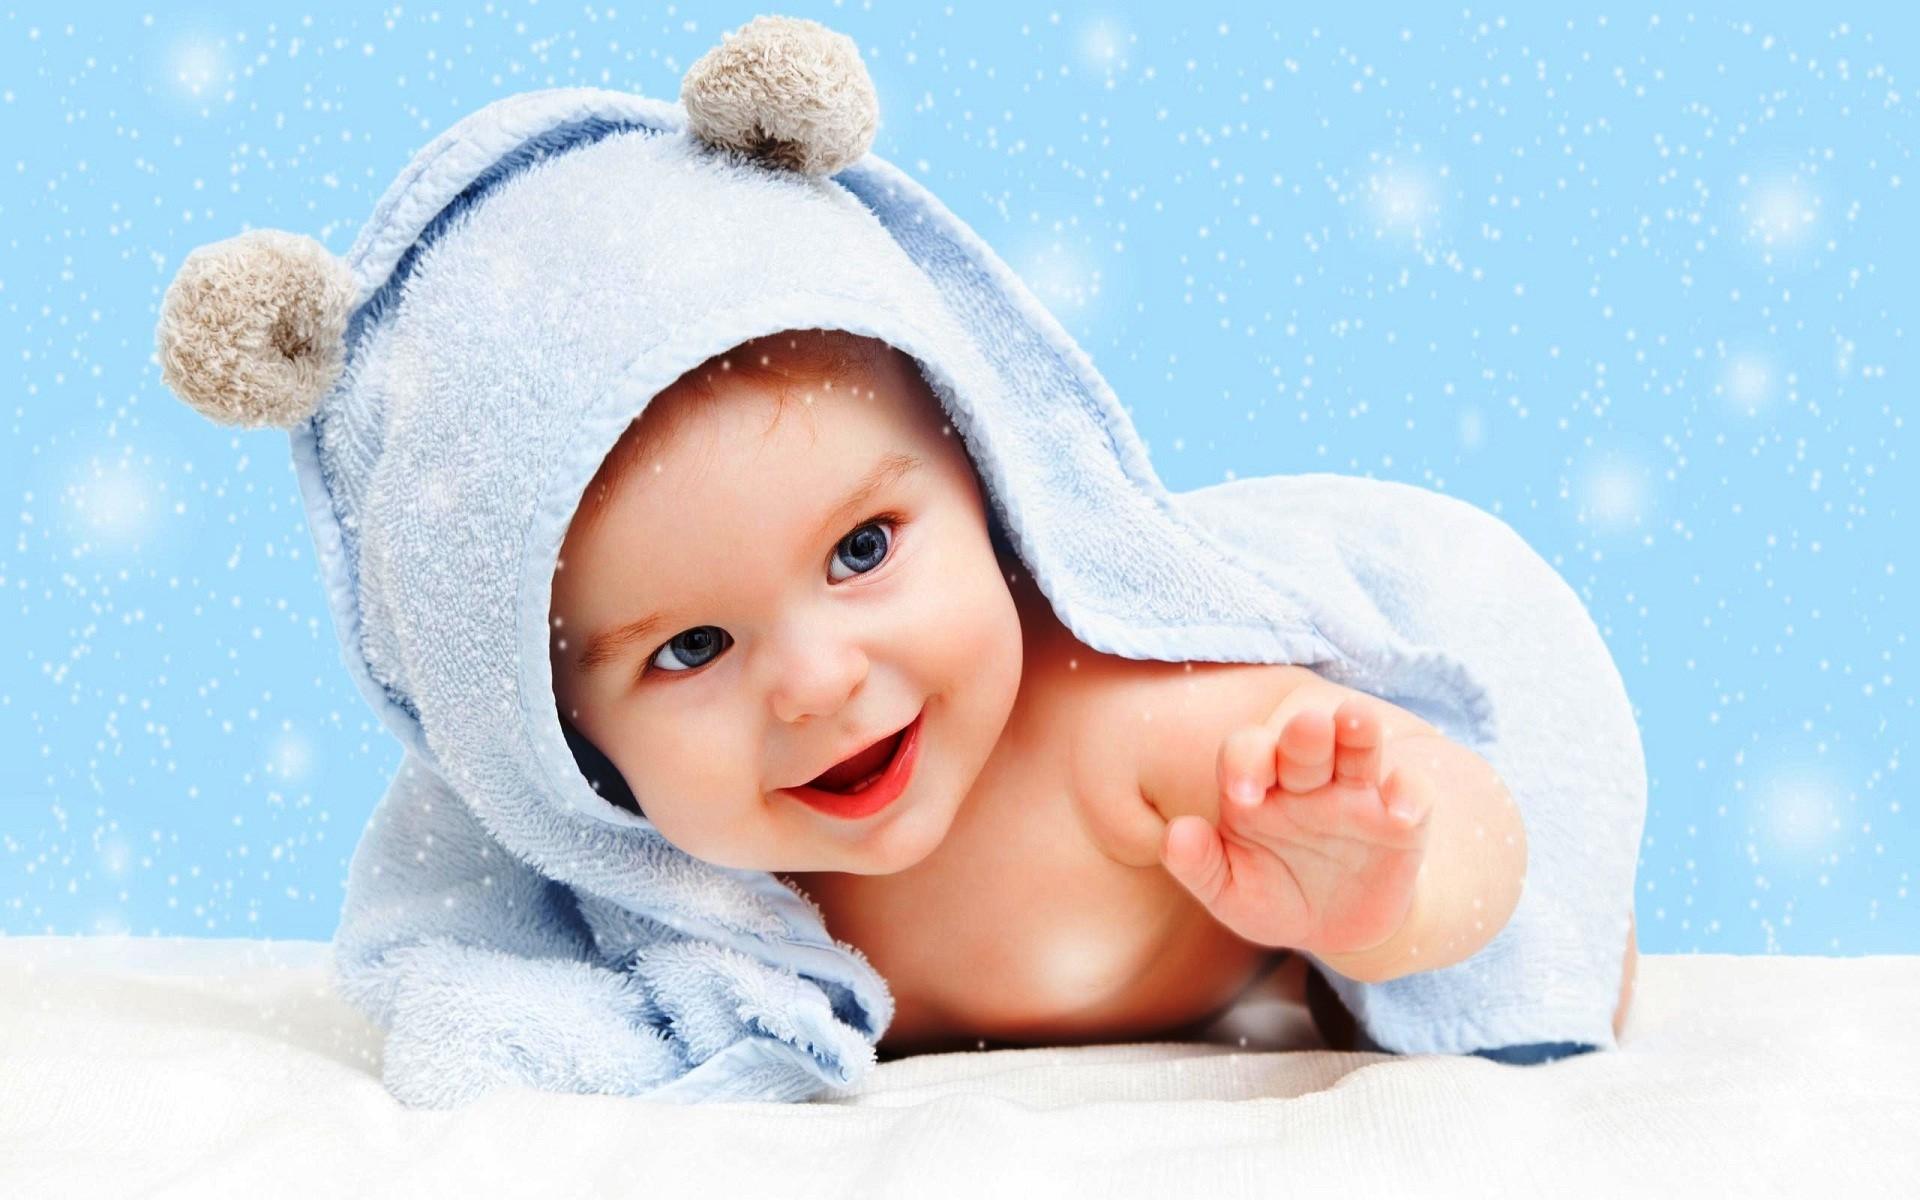 cute baby boy pictures wallpapers